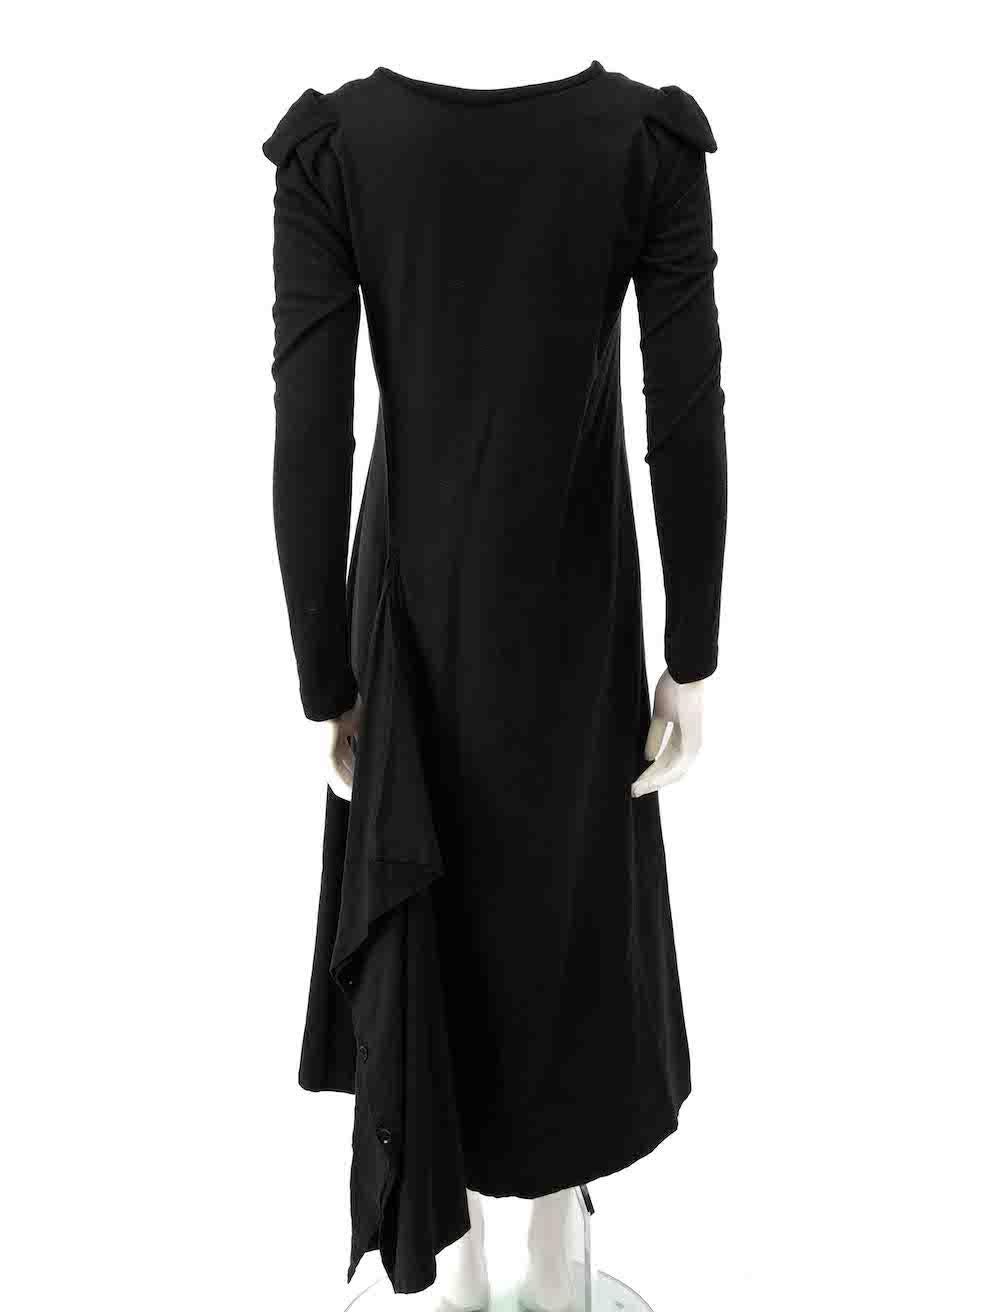 Yohji Yamamoto Black Button Skirt Detail Dress Size XS In Excellent Condition For Sale In London, GB